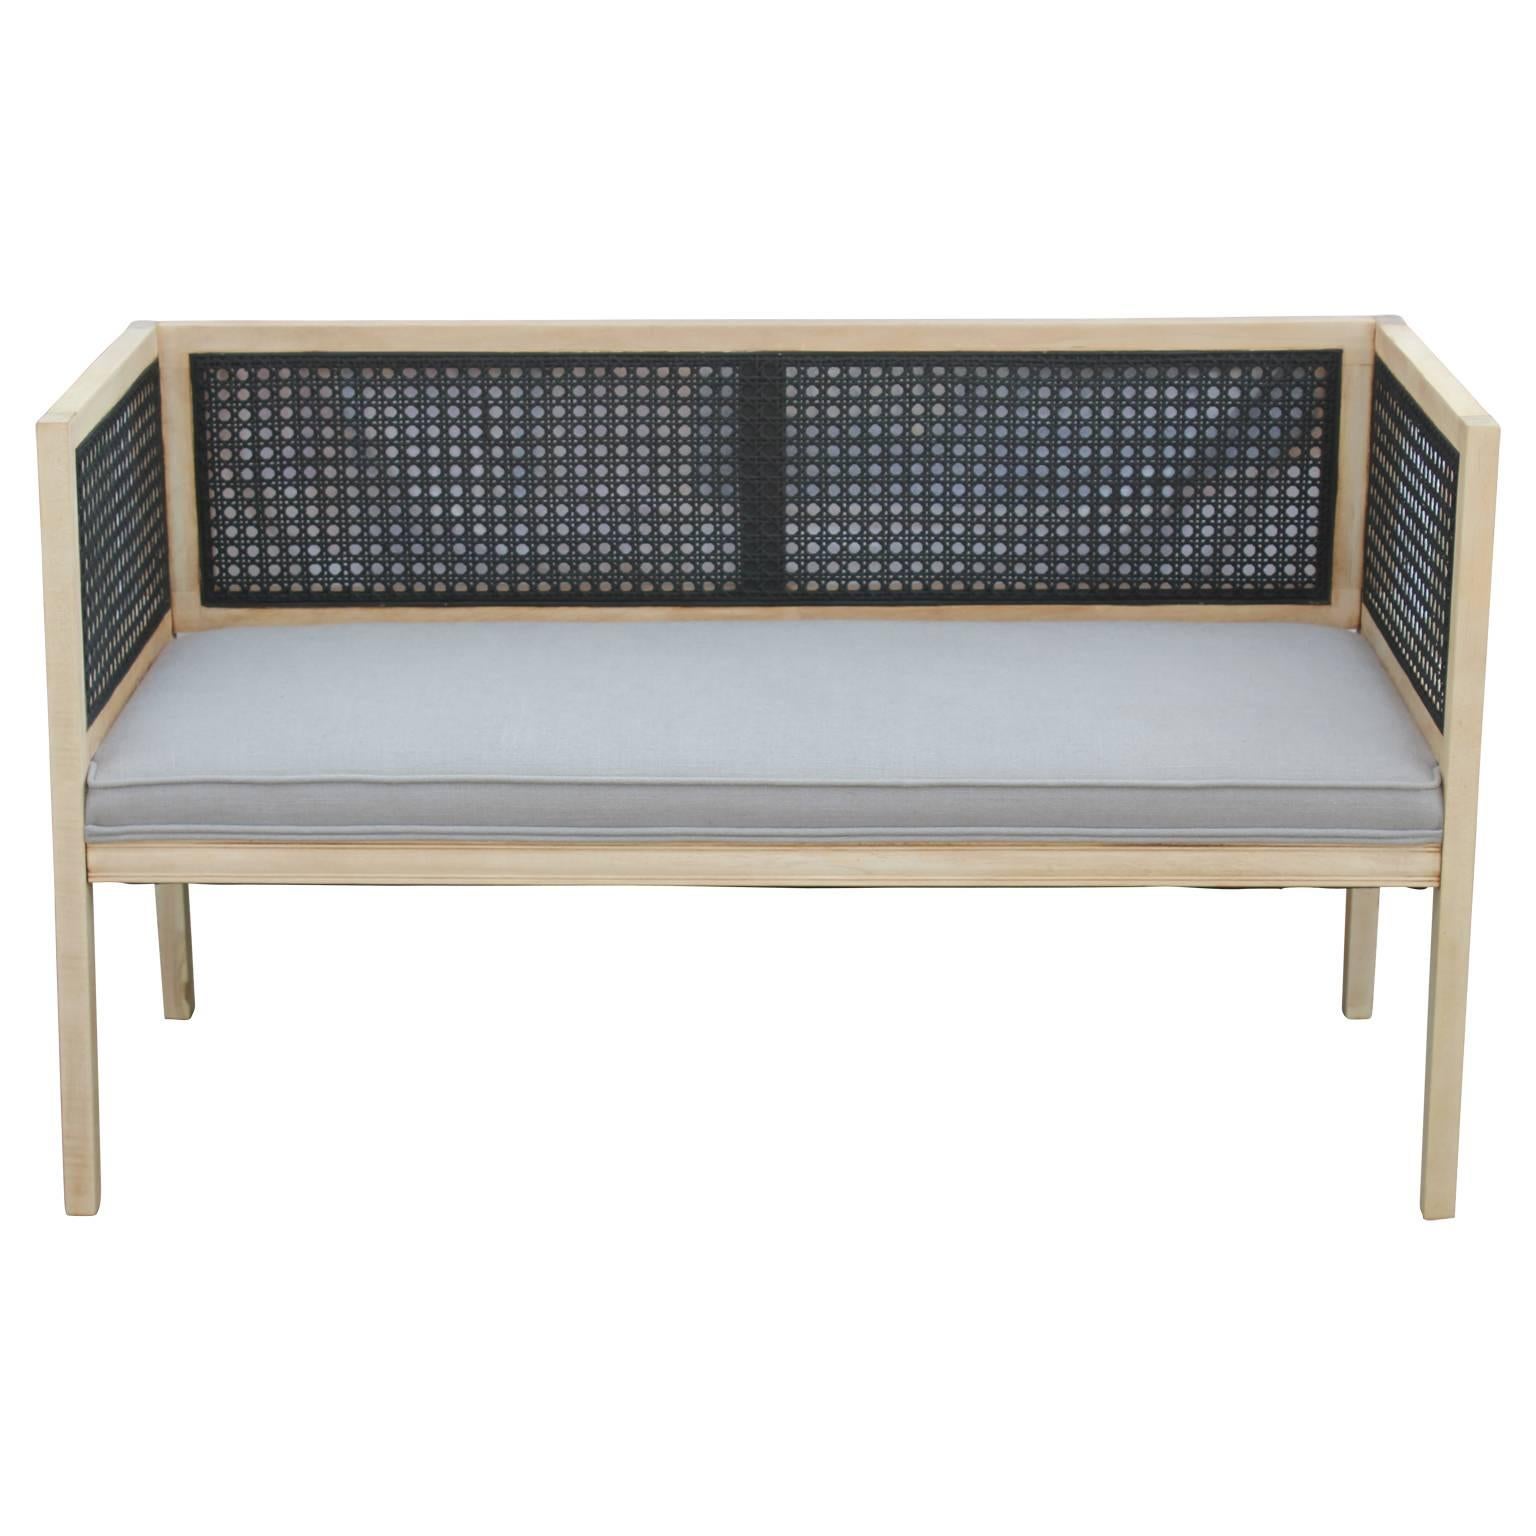 Mid-Century Modern Modern Cane and Bleached Wood Settee or Love Seat in a Light Grey Woven